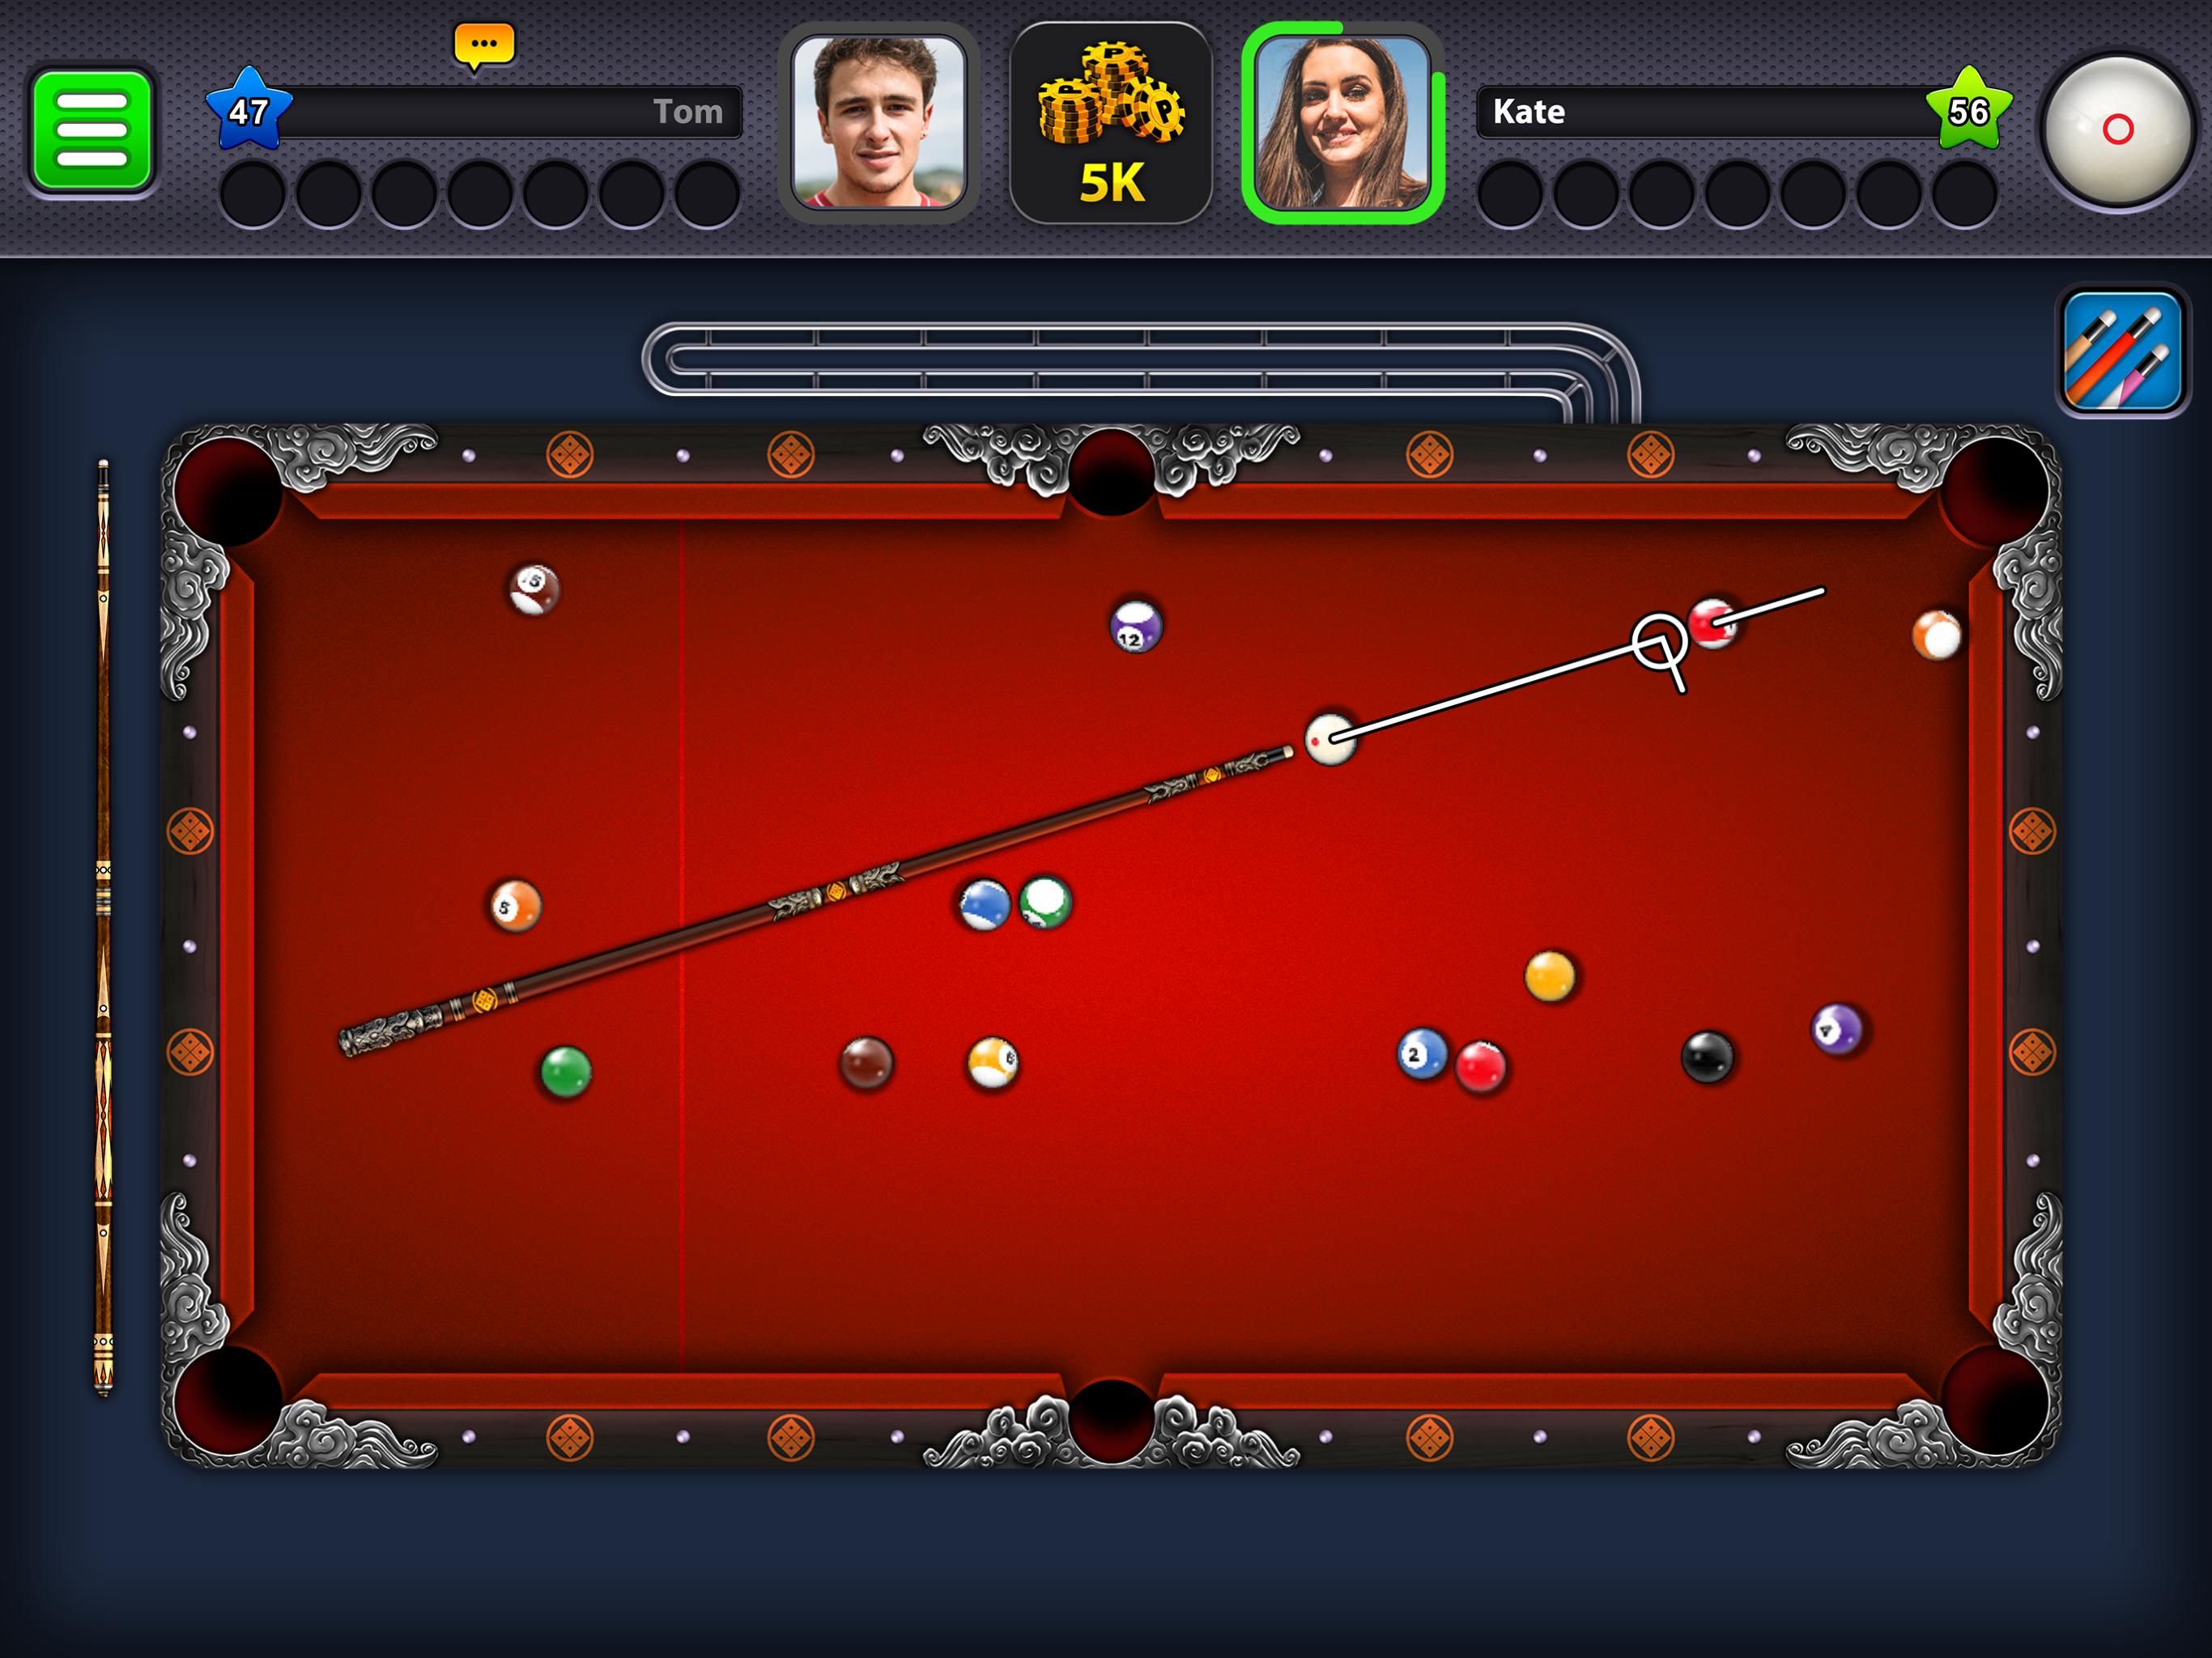 8 Ball Pool for Android - APK Download